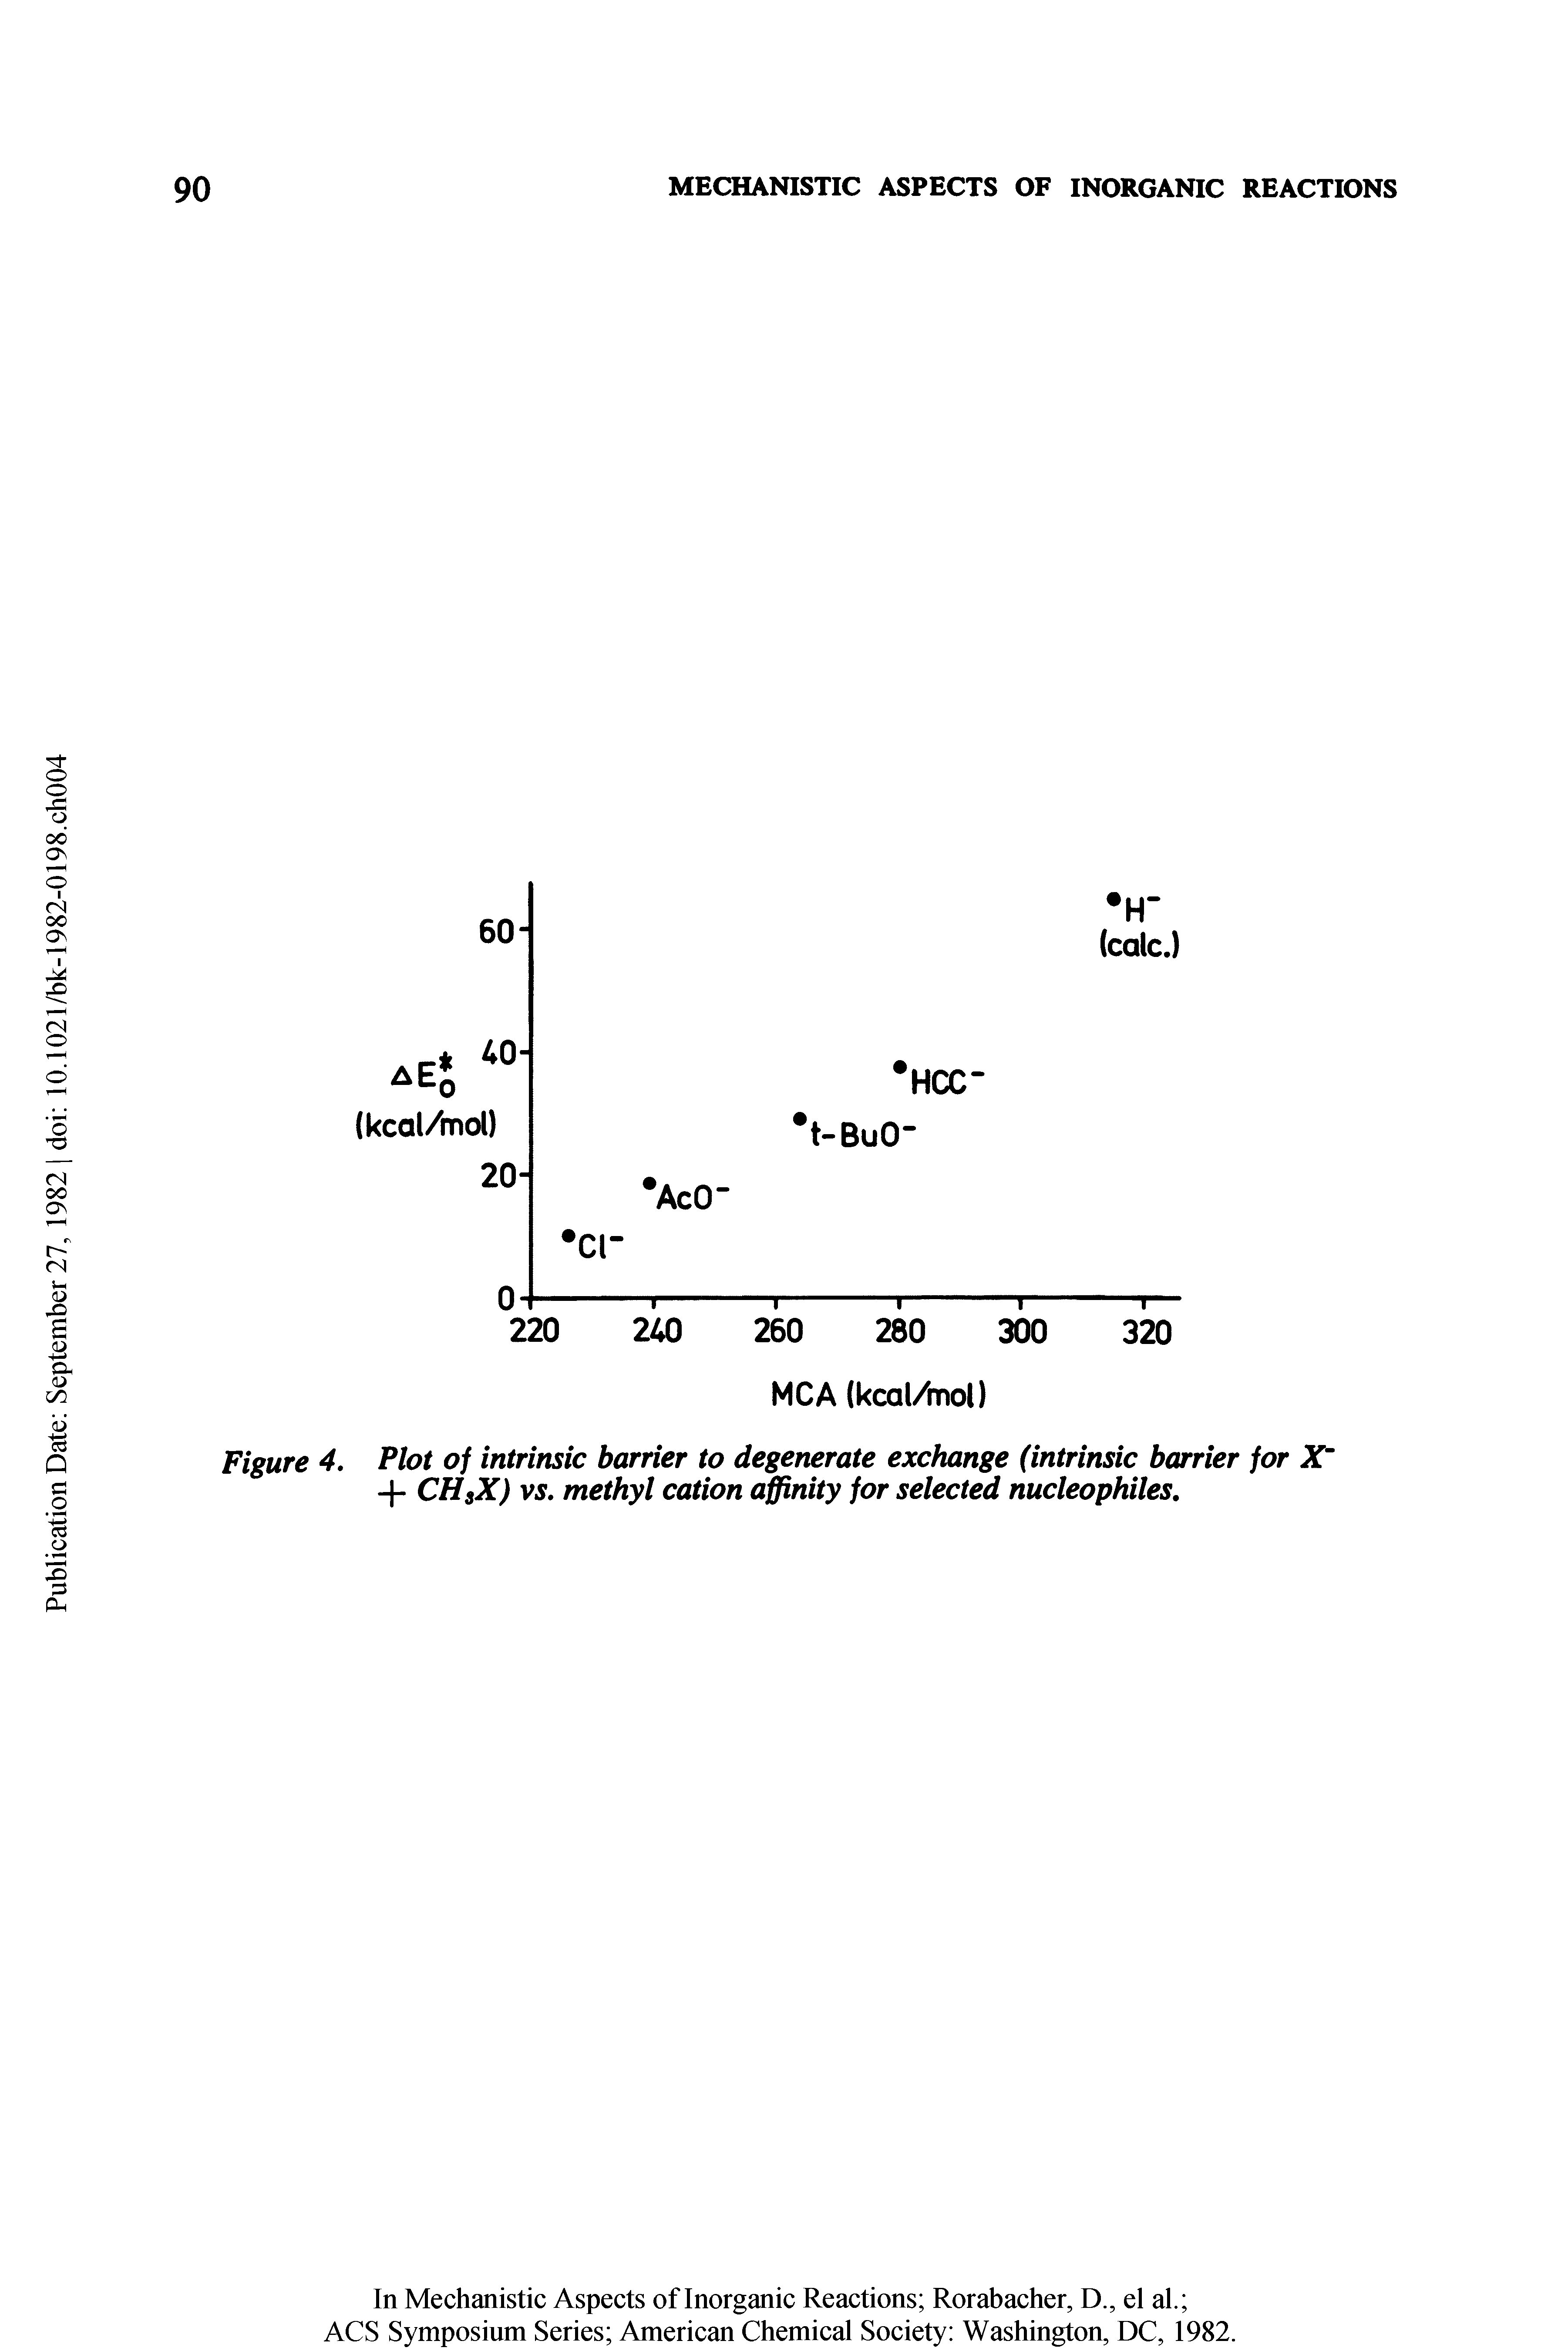 Figure 4. Plot of intrinsic barrier to degenerate exchange (intrinsic barrier for X + CHSX) vs. methyl cation affinity for selected nucleophiles.